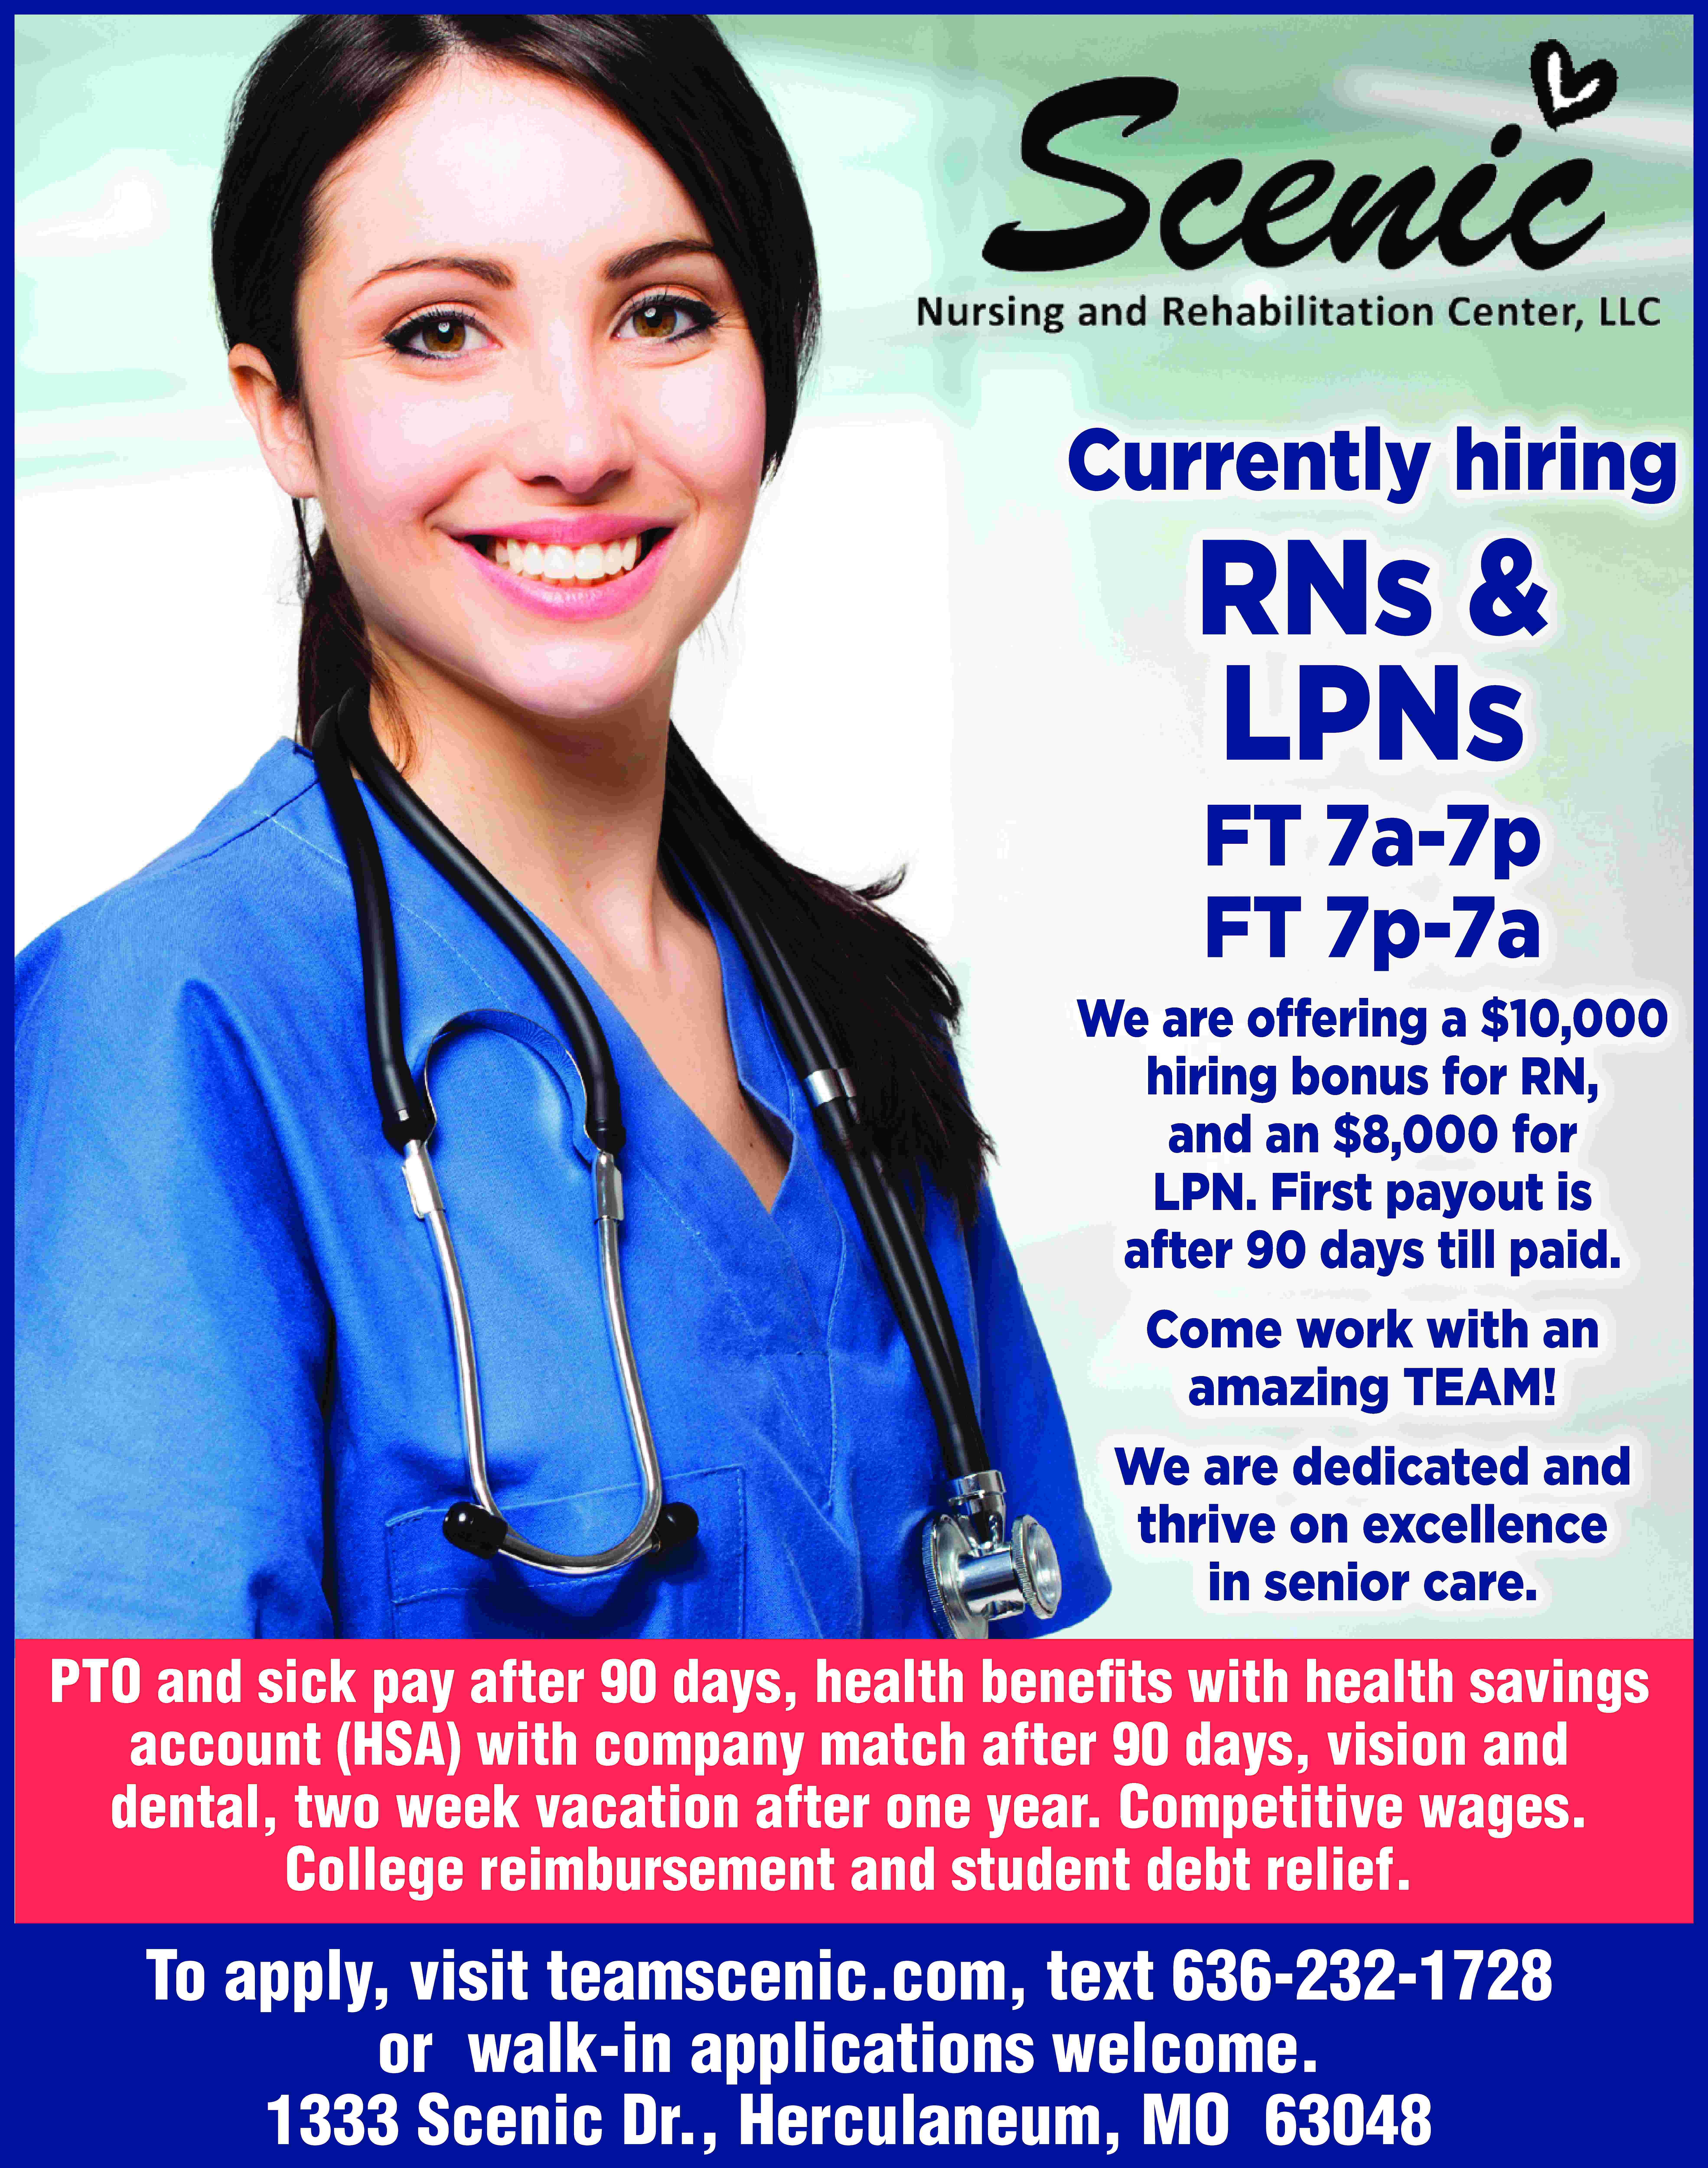 Currently hiring RNs & LPNs  Currently hiring RNs & LPNs FT 7a-7p FT 7p-7a We are offering a $10,000 hiring bonus for RN, and an $8,000 for LPN. First payout is after 90 days till paid. Come work with an amazing TEAM! We are dedicated and thrive on excellence in senior care. PTO and sick pay after 90 days, health benefits with health savings account (HSA) with company match after 90 days, vision and dental, two week vacation after one year. Competitive wages. College reimbursement and student debt relief. To apply, visit teamscenic.com, text 636-232-1728 or walk-in applications welcome. 1333 Scenic Dr., Herculaneum, MO 63048